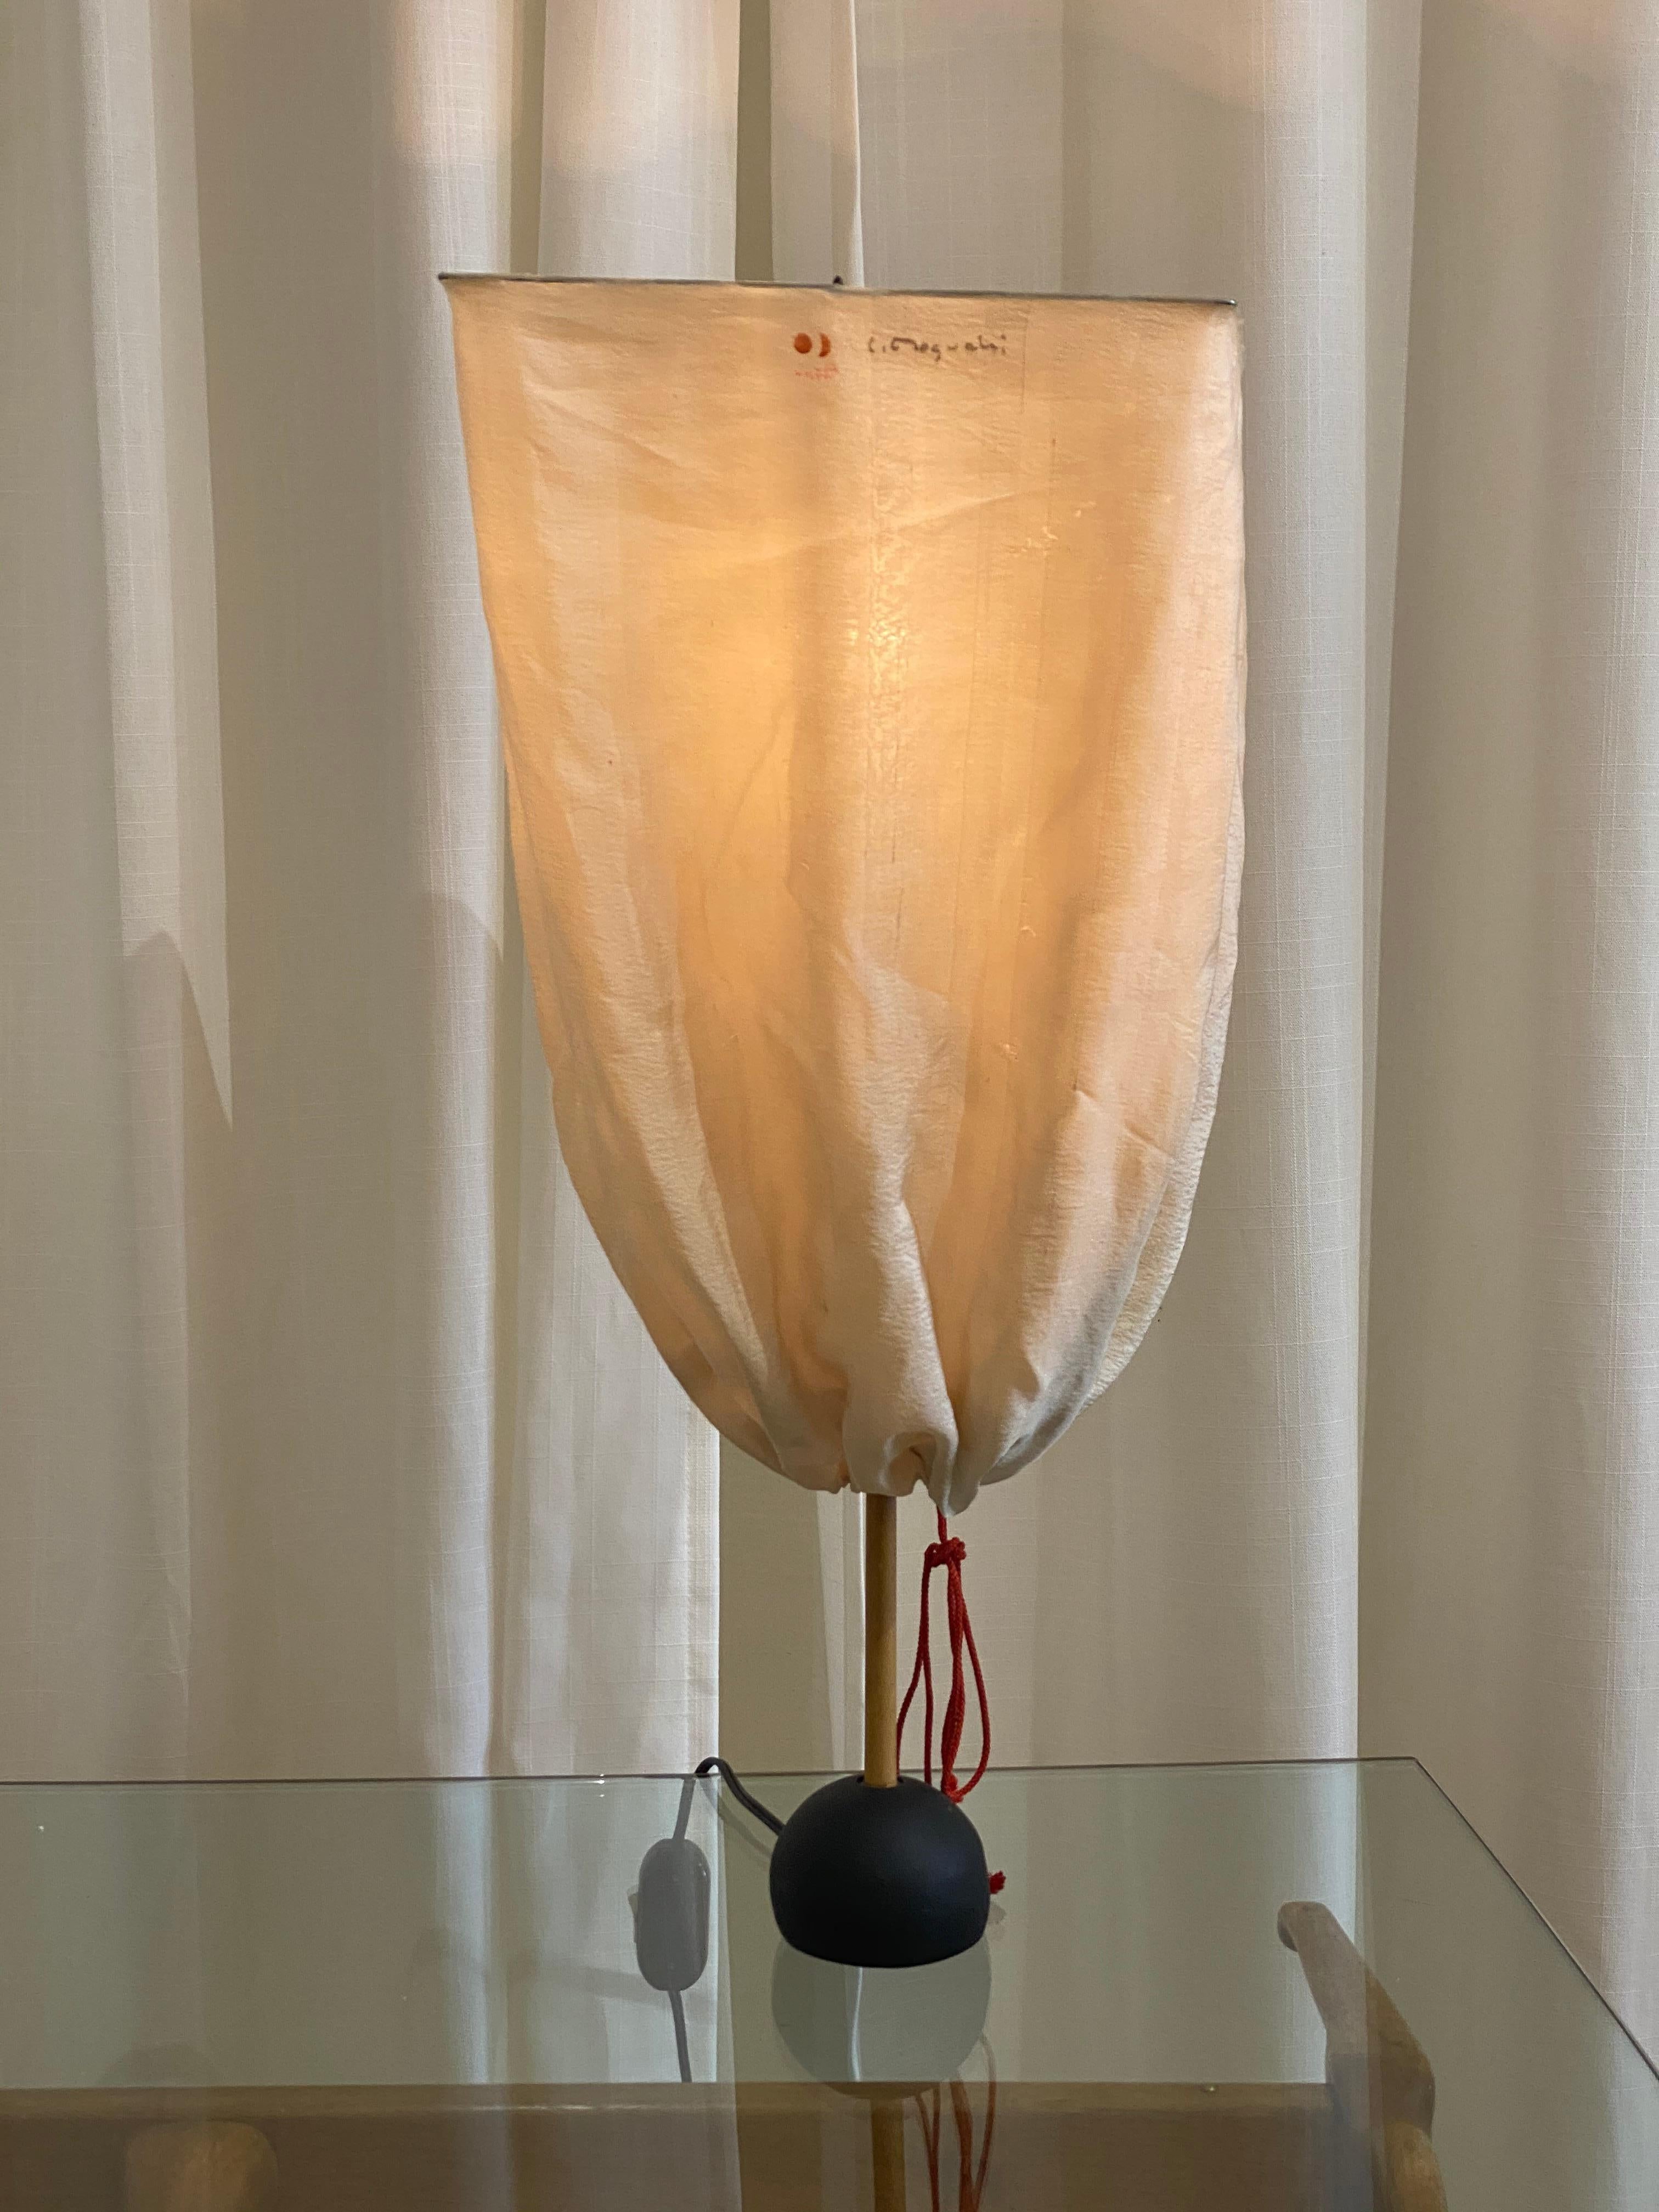 A rare all original table lamp. Designed by Isamu Noguchi, for Ozeki, Japan, 1960s. 

Series started in 1951. 

Other designers of the period include George Nakashima, Paul Frankl, Vladimir Kagan, and T.H. Robsjohn-Gibbings.